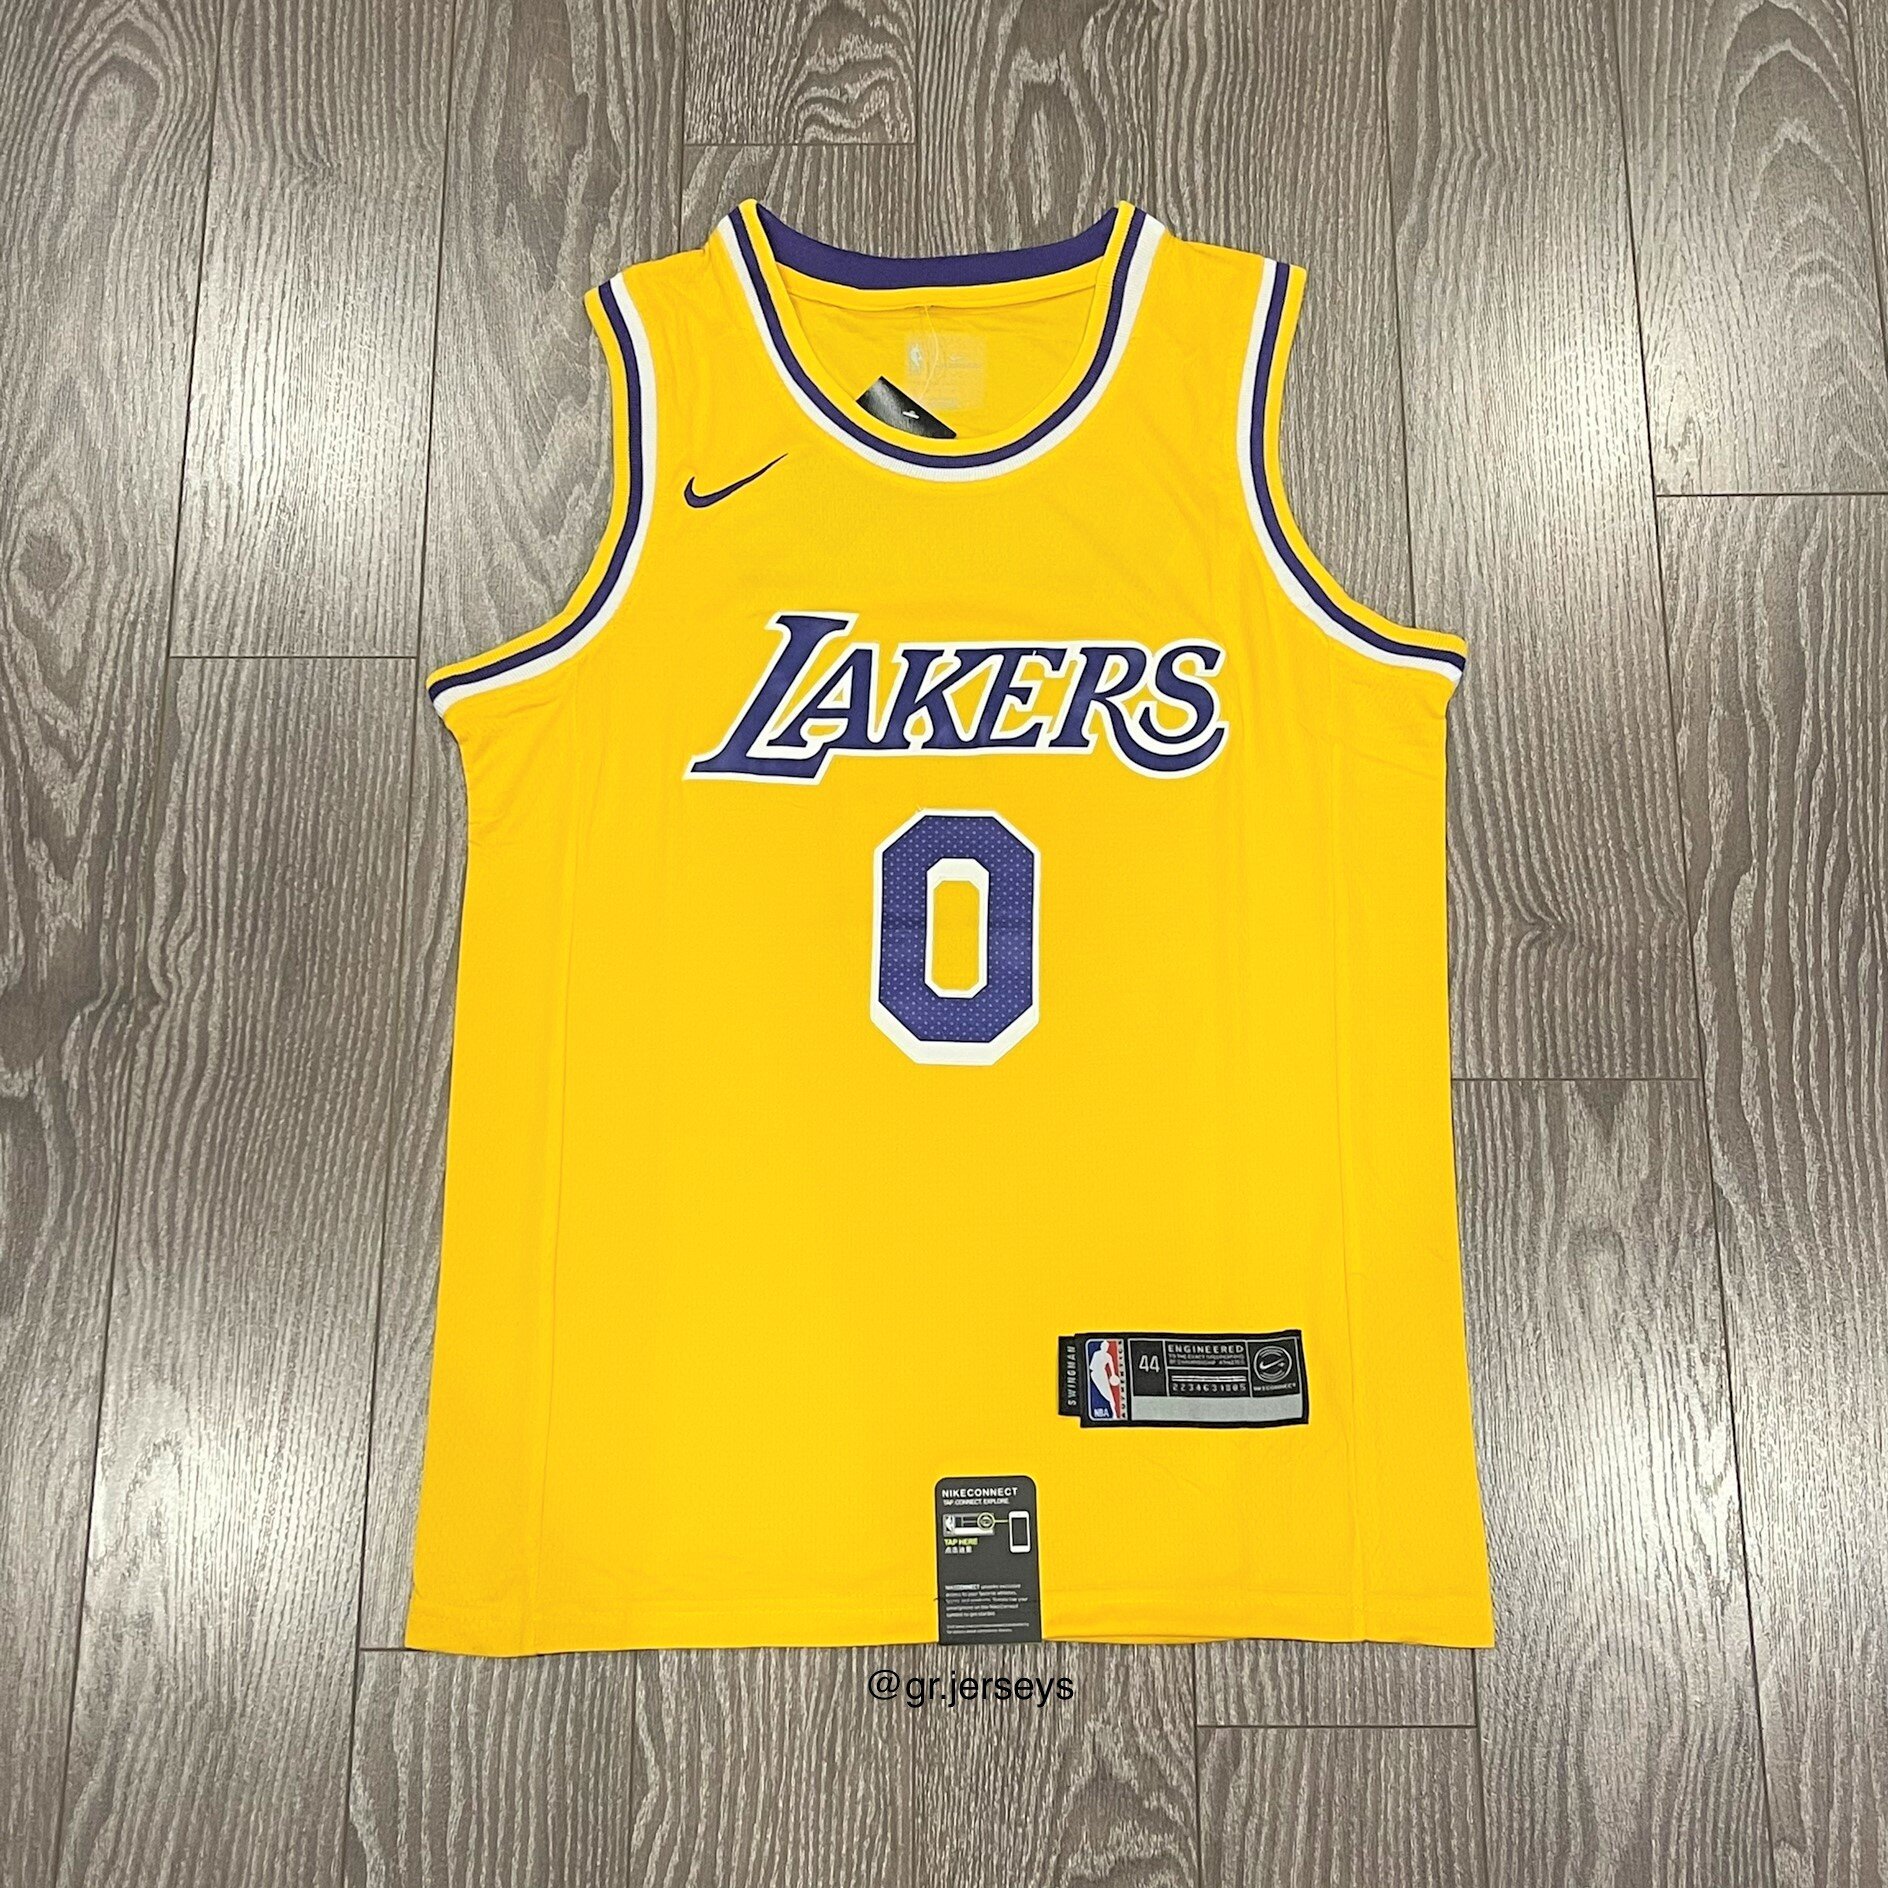 Los Angeles Lakers #0 Russell Westbrook Jersey Mens Size Medium